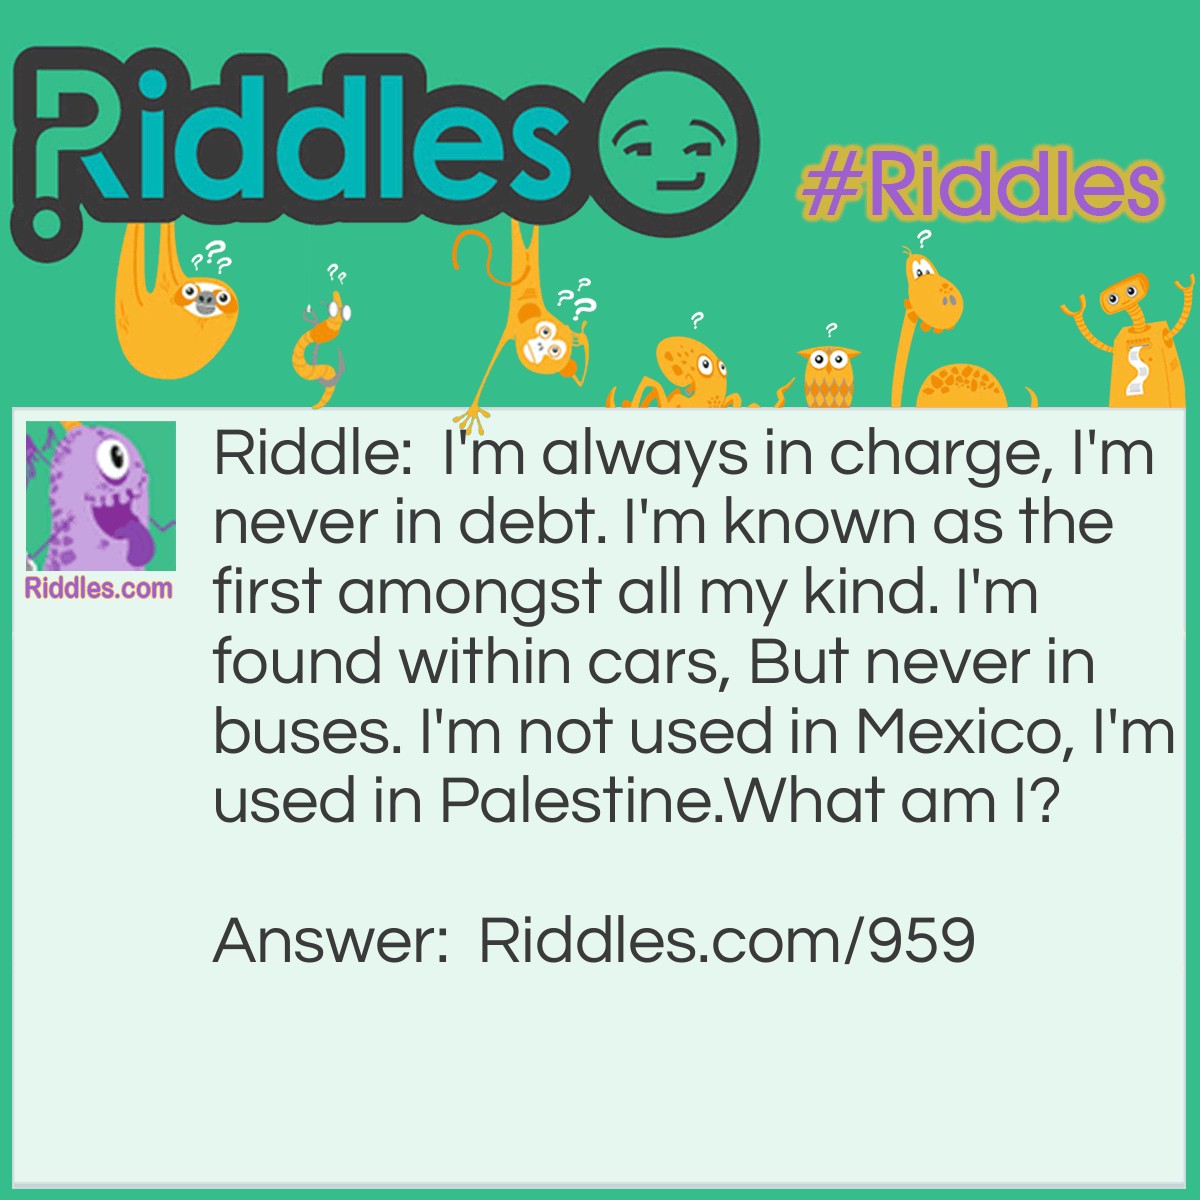 Riddle: I'm always in charge, I'm never in debt. I'm known as the first amongst all my kind. I'm found within cars, But never in buses. I'm not used in Mexico, I'm used in Palestine.
What am I? Answer: The letter 'a.'